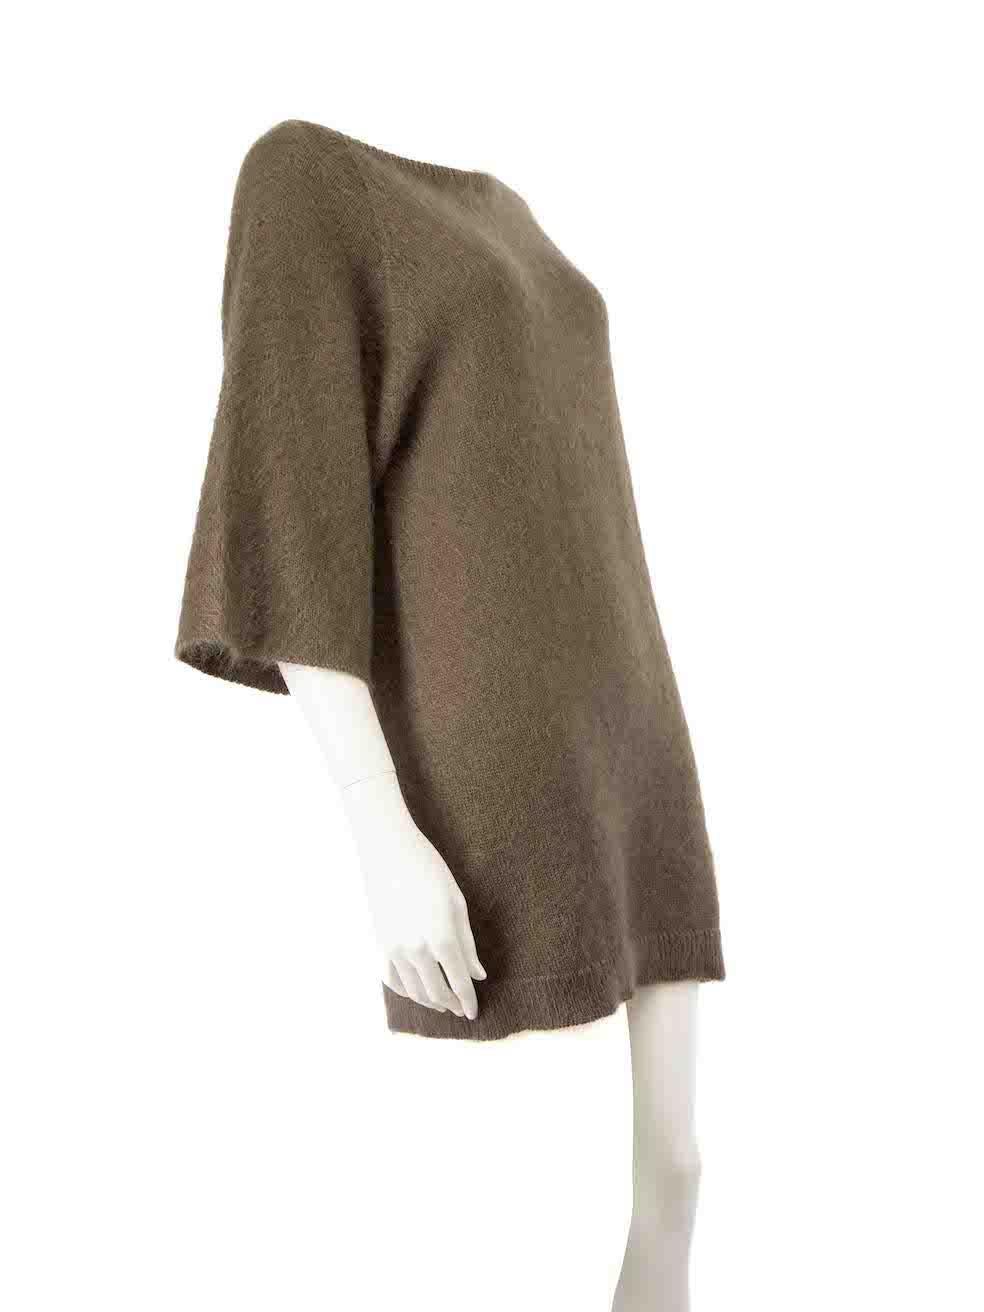 CONDITION is Very good. Hardly any visible wear to the dress is evident on this used Hermès designer resale item.
 
 
 
 Details
 
 
 Khaki
 
 Wool
 
 Mid length sleeve
 
 Mini dress
 
 Brushed texture
 
 Knitted and stretchy
 
 Round neckline
 
 
